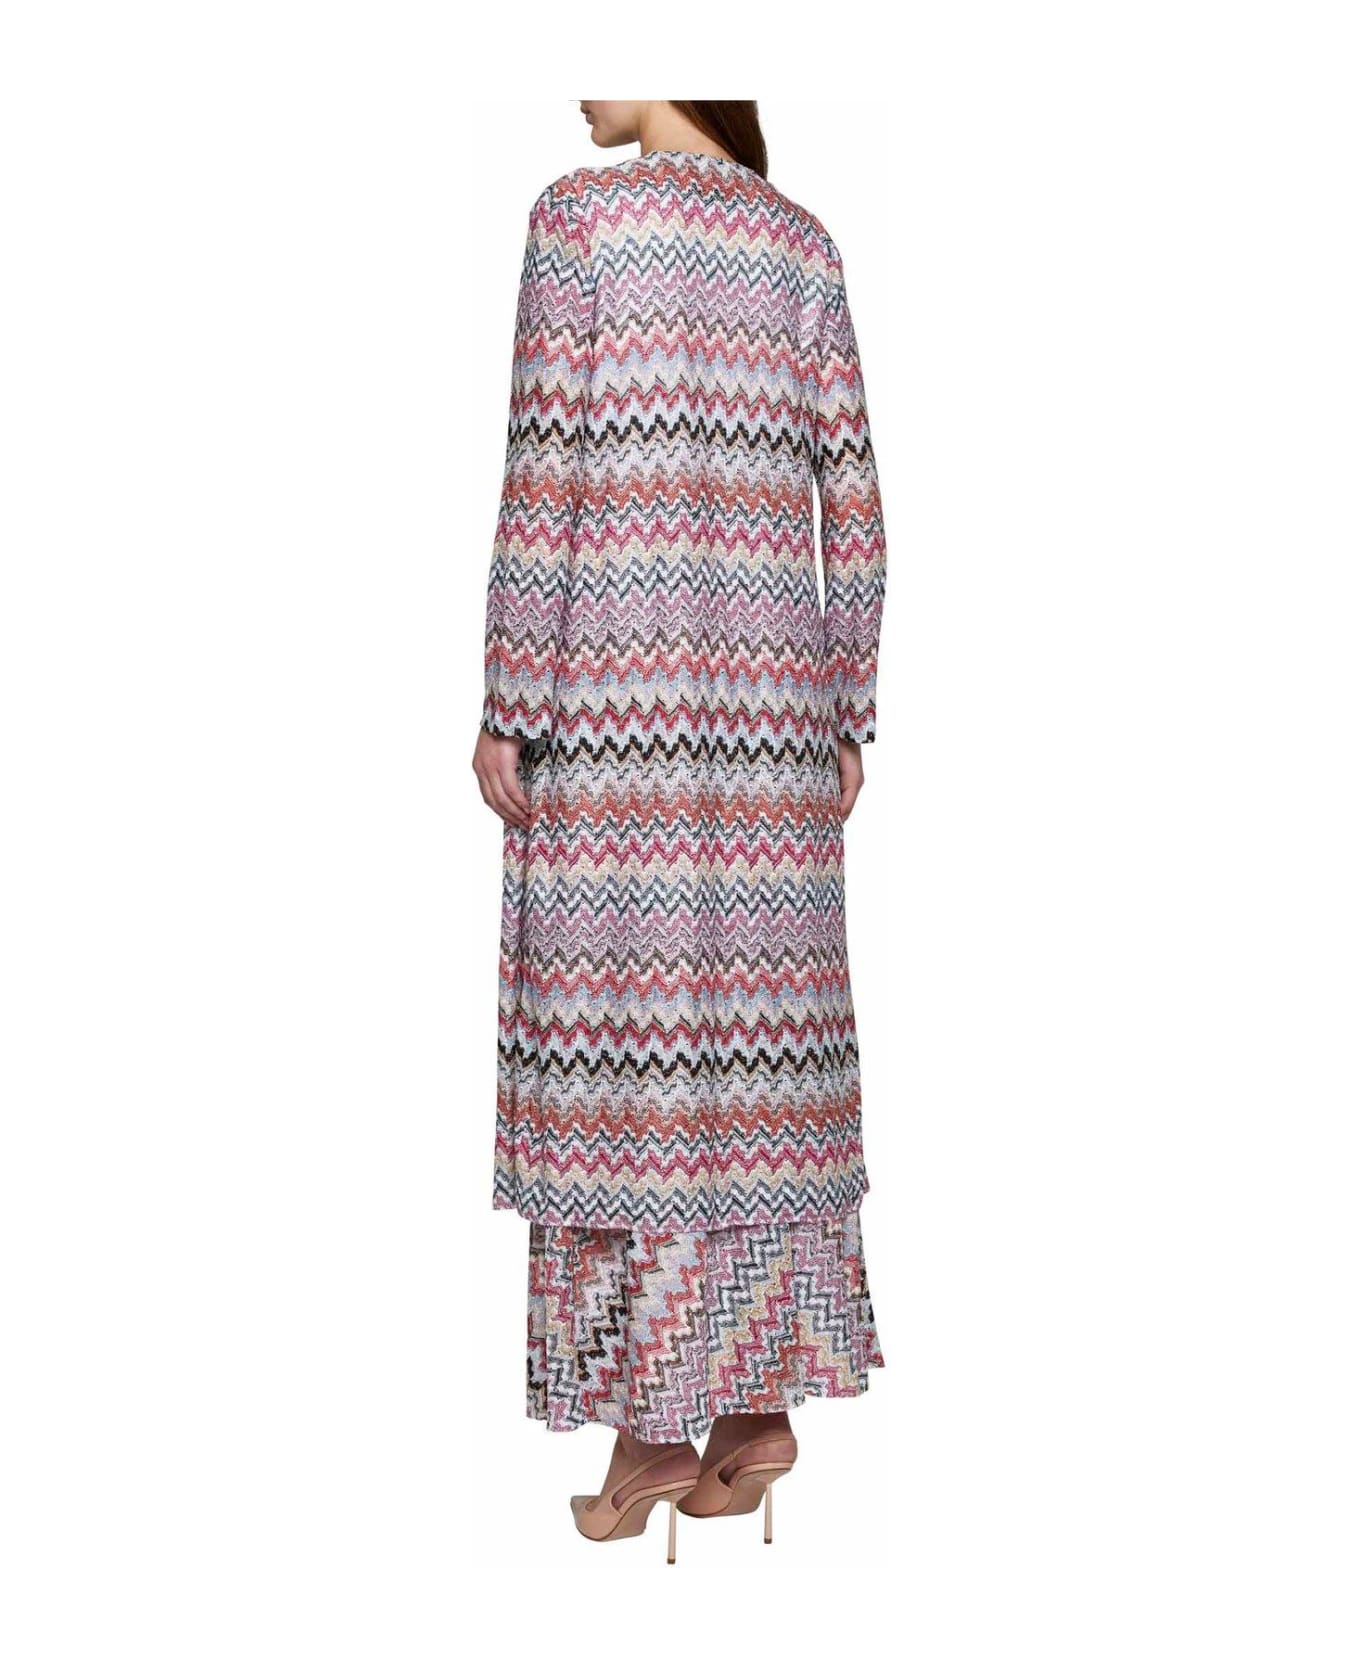 Missoni All-over Patterned Long-sleeved Cardigan - Multicolor カーディガン